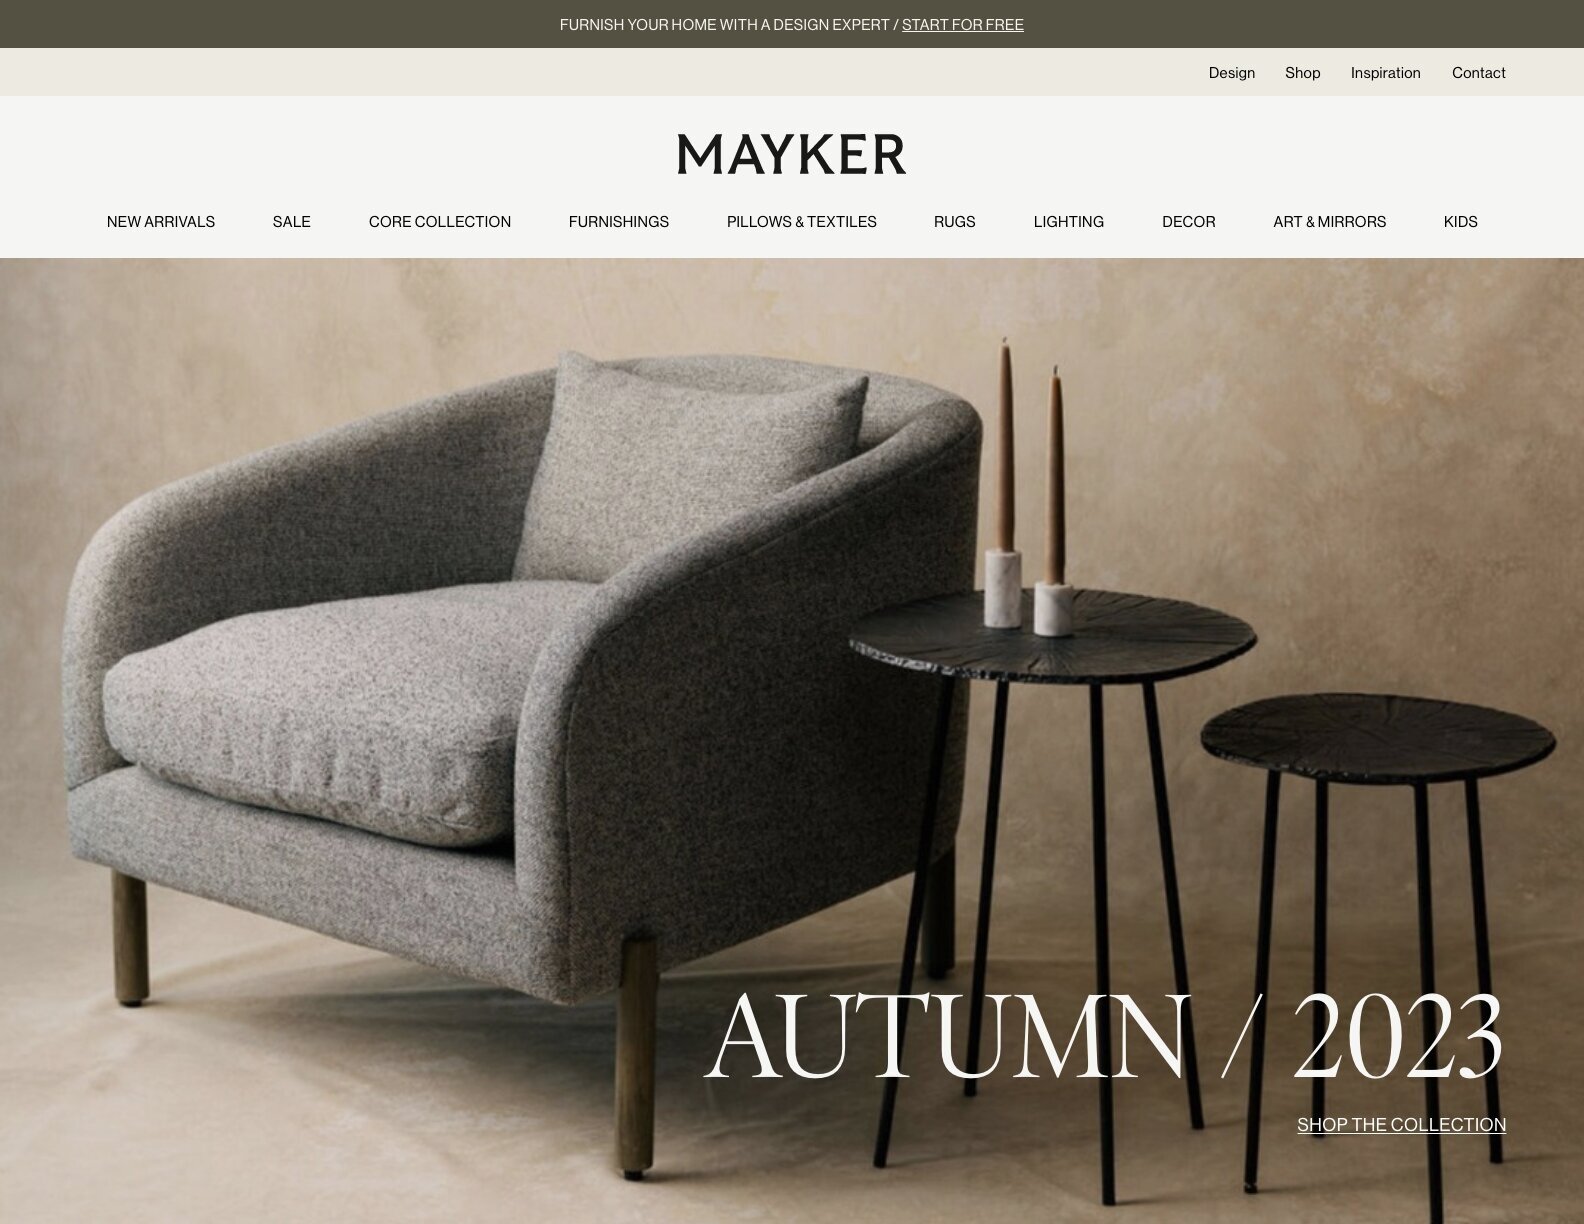 website-design-for-retail-interiors-comapny-refined-layout